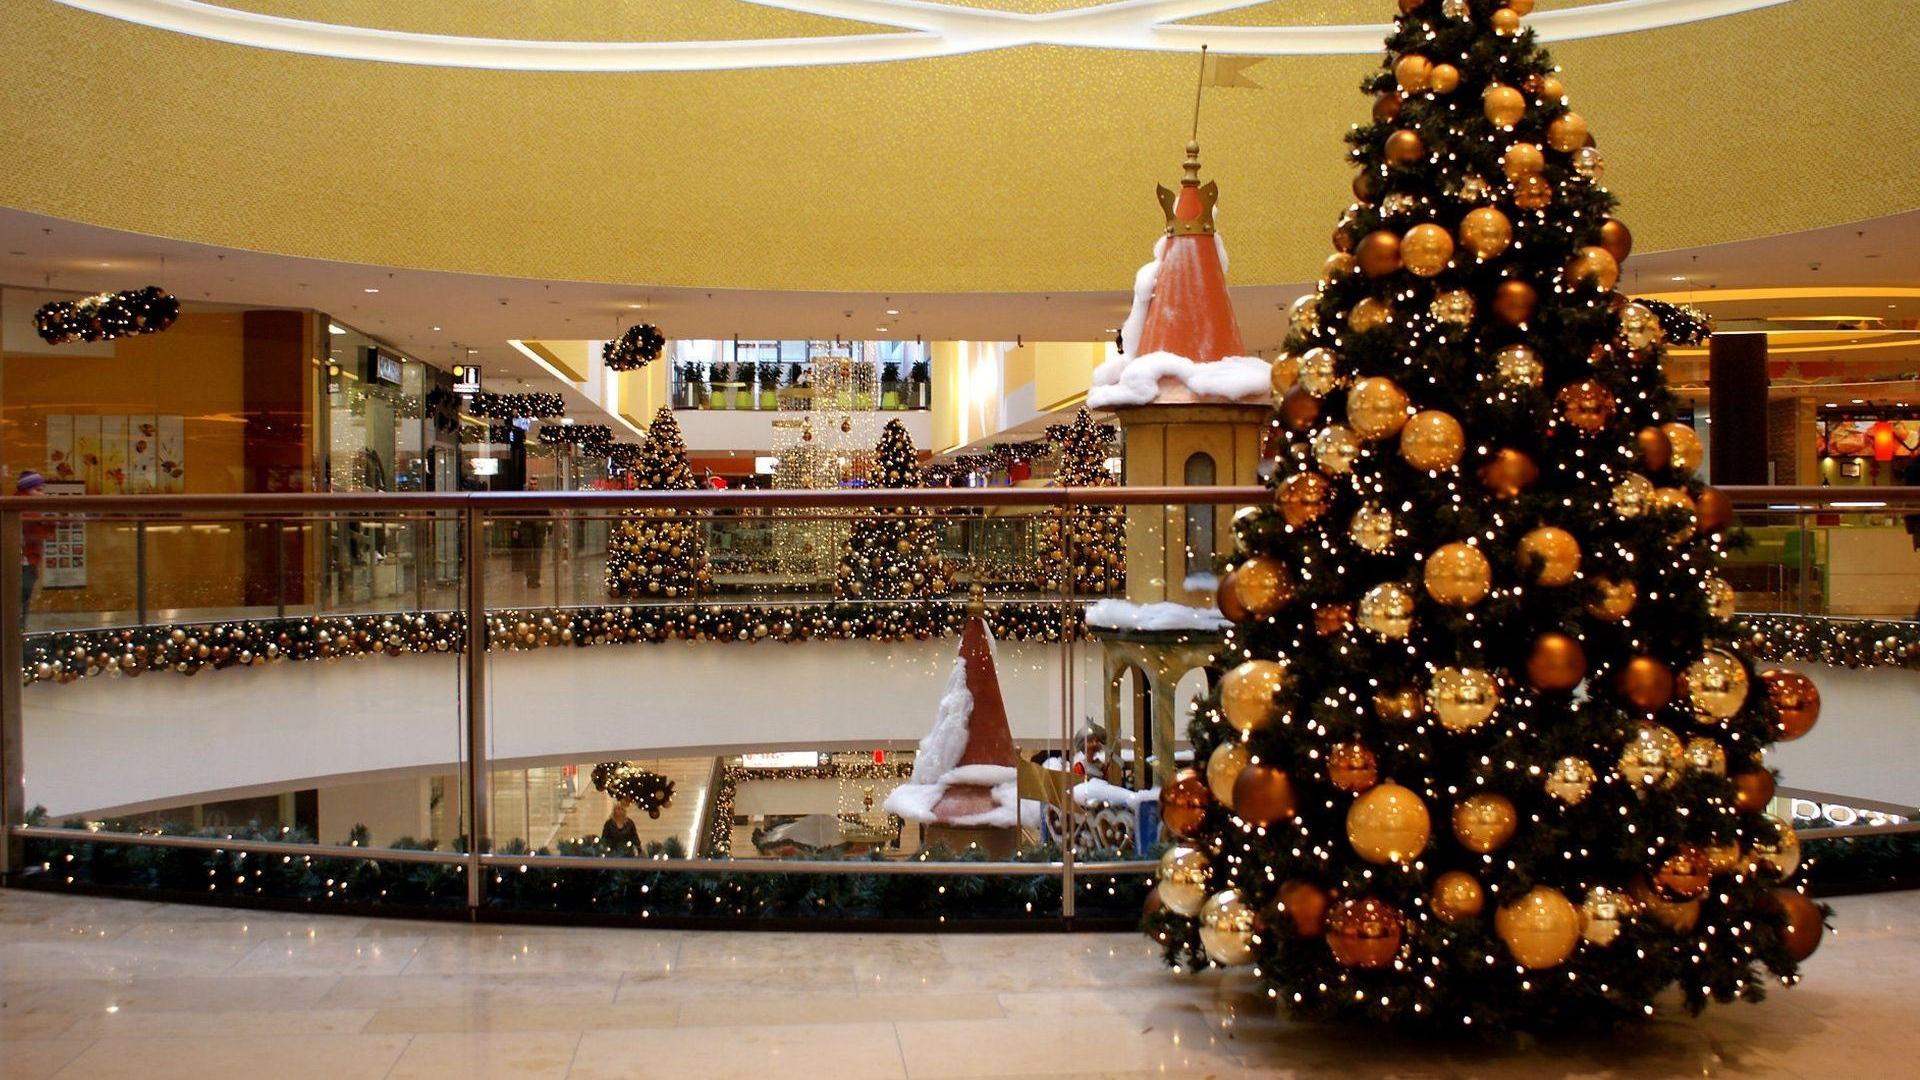 Download wallpaper 1920x1080 tree, shopping center, holiday